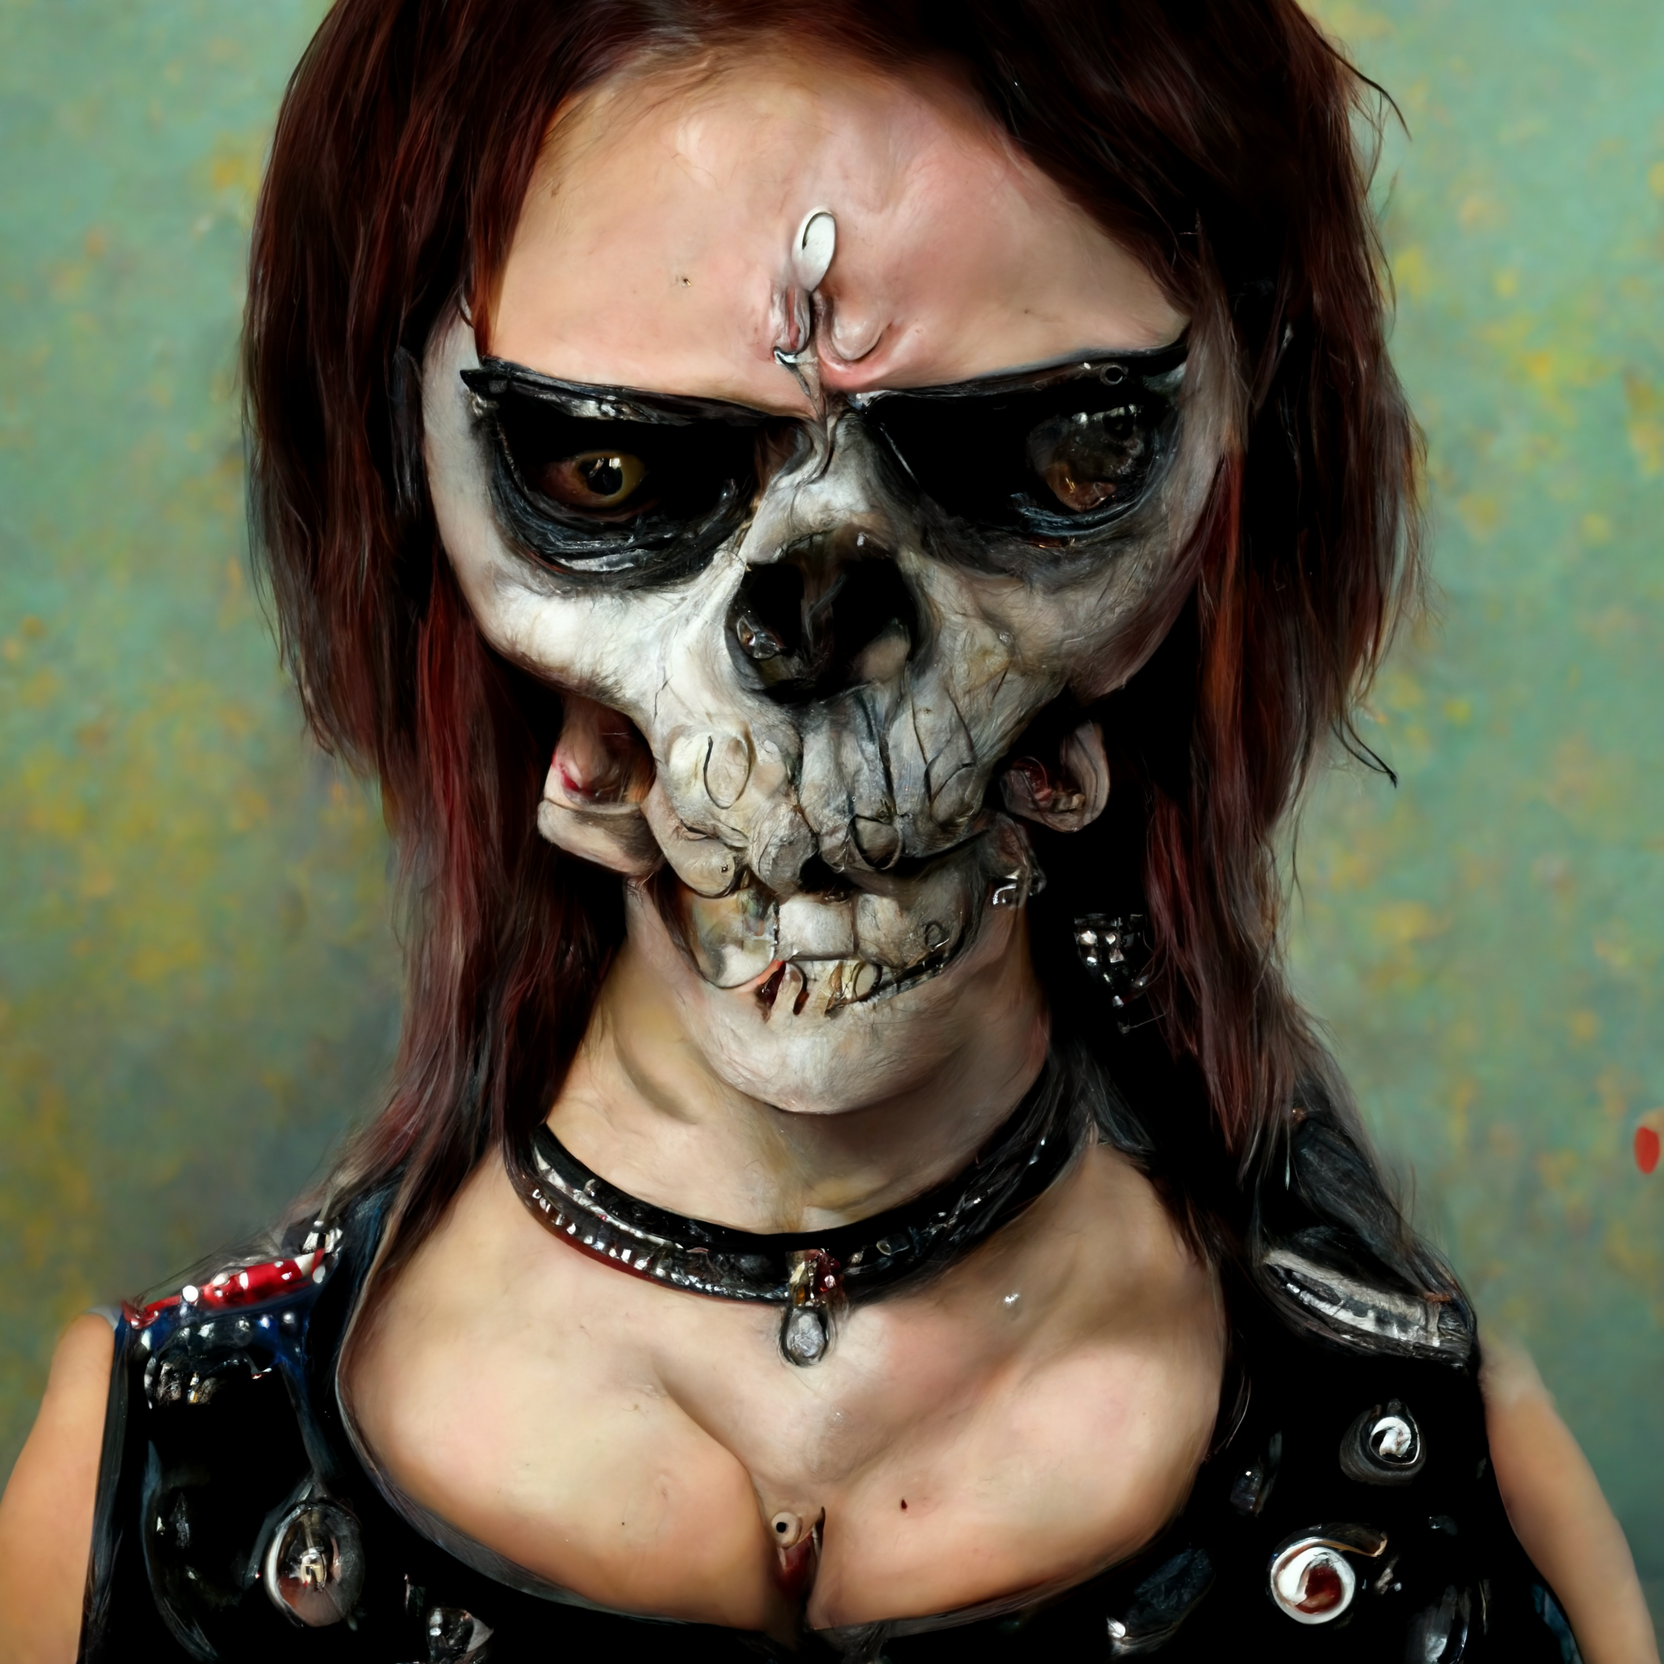 1dfb859b-74ac-4f58-bac1-72c5494c9ff7_pinkgirl4_close_up_very_realistic_skull_girl_with_rocker_outfit.png